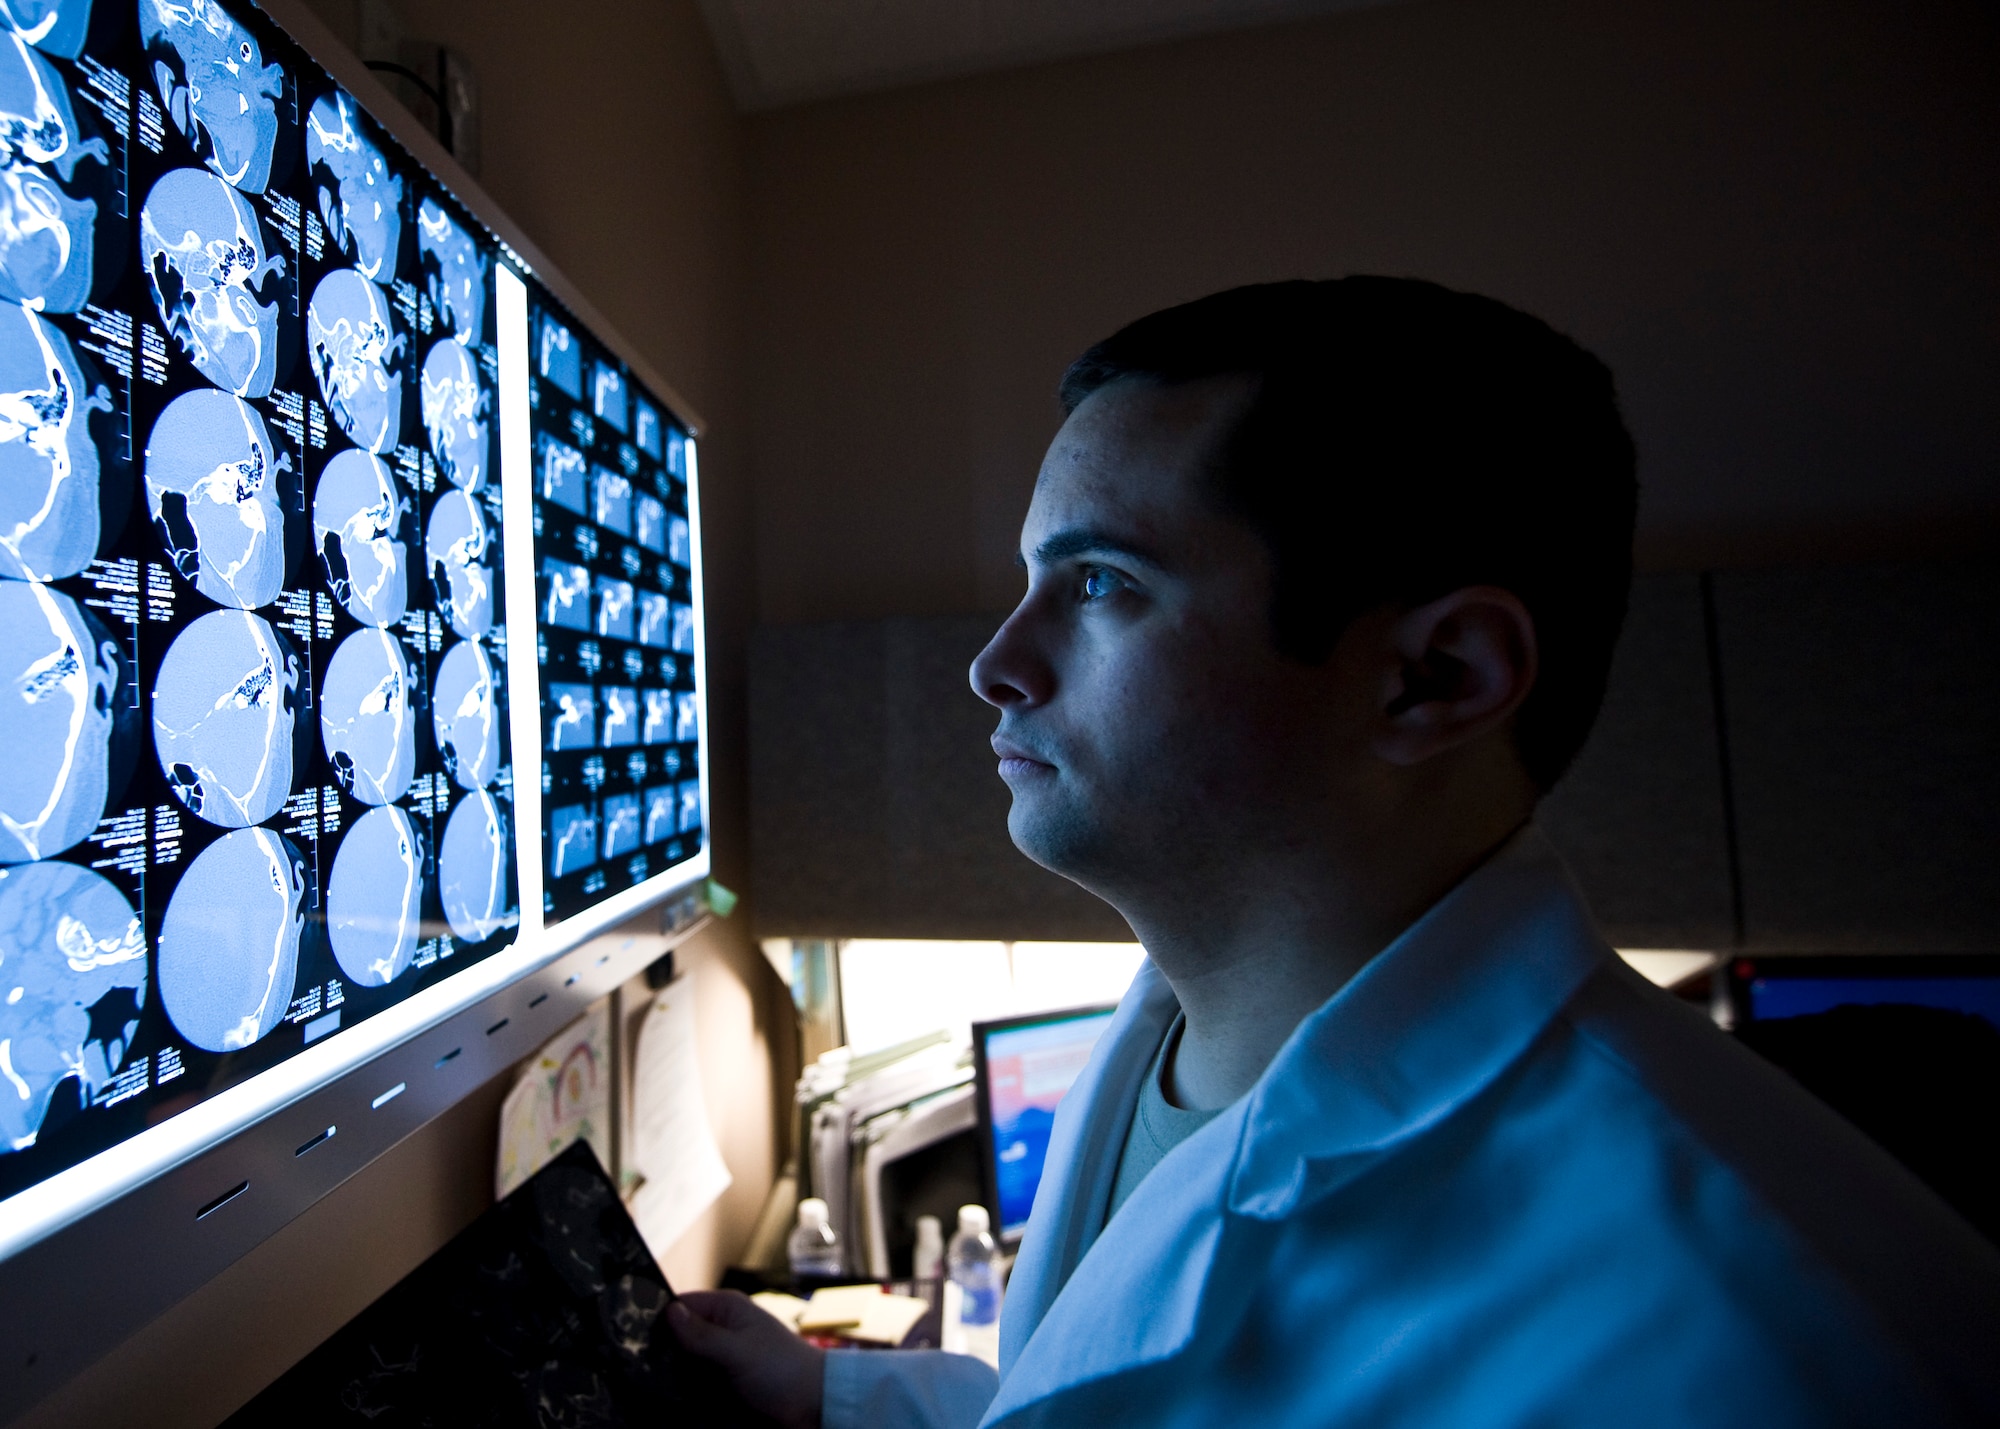 Capt. (Dr.) Wesley Reynolds studies a patient’s computed tomography scan at the Mike O’Callaghan Federal Medical Center March 18, 2014, at Nellis Air Force Base, Nev. March is brain injury awareness month. According to the Brain Injury Association of America, about 75 percent of traumatic brain injuries are concussions or other forms of mild TBIs. Reynolds is a 99th Medical Operations Squadron neurologist. (U.S. Air Force photo/Senior Airman Jason Couillard)